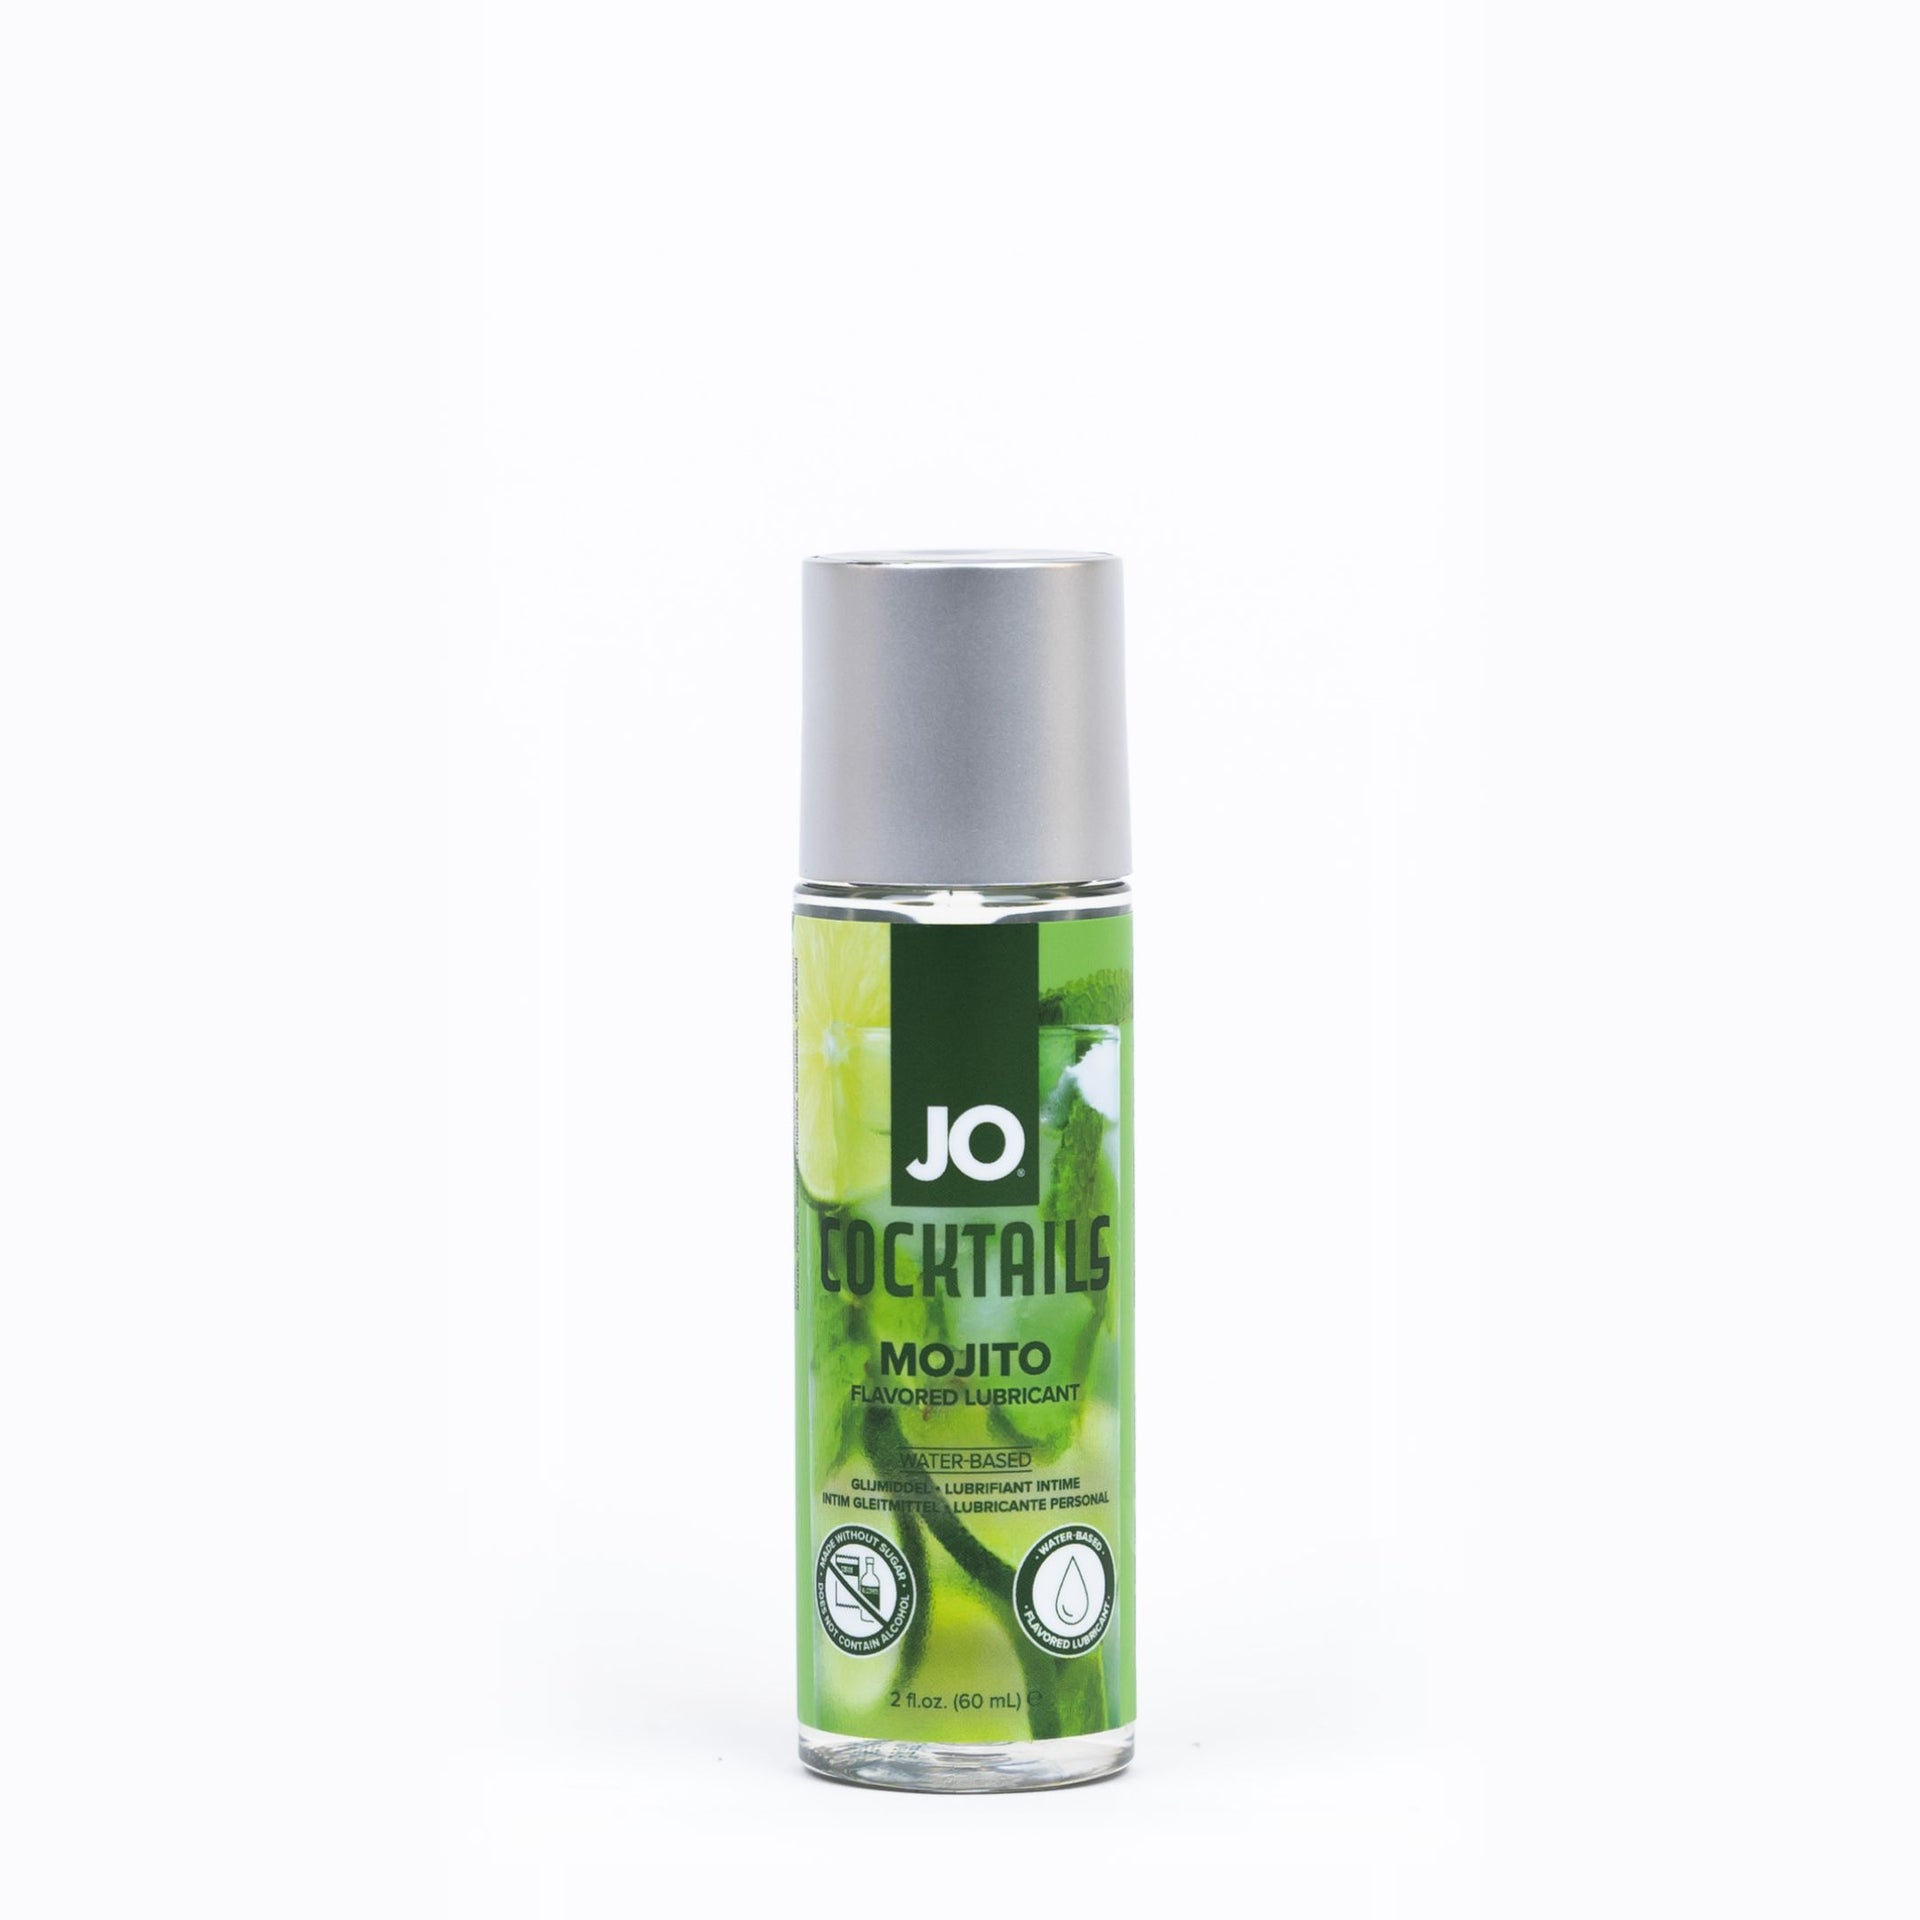 mojito flavored lubricant front of pack